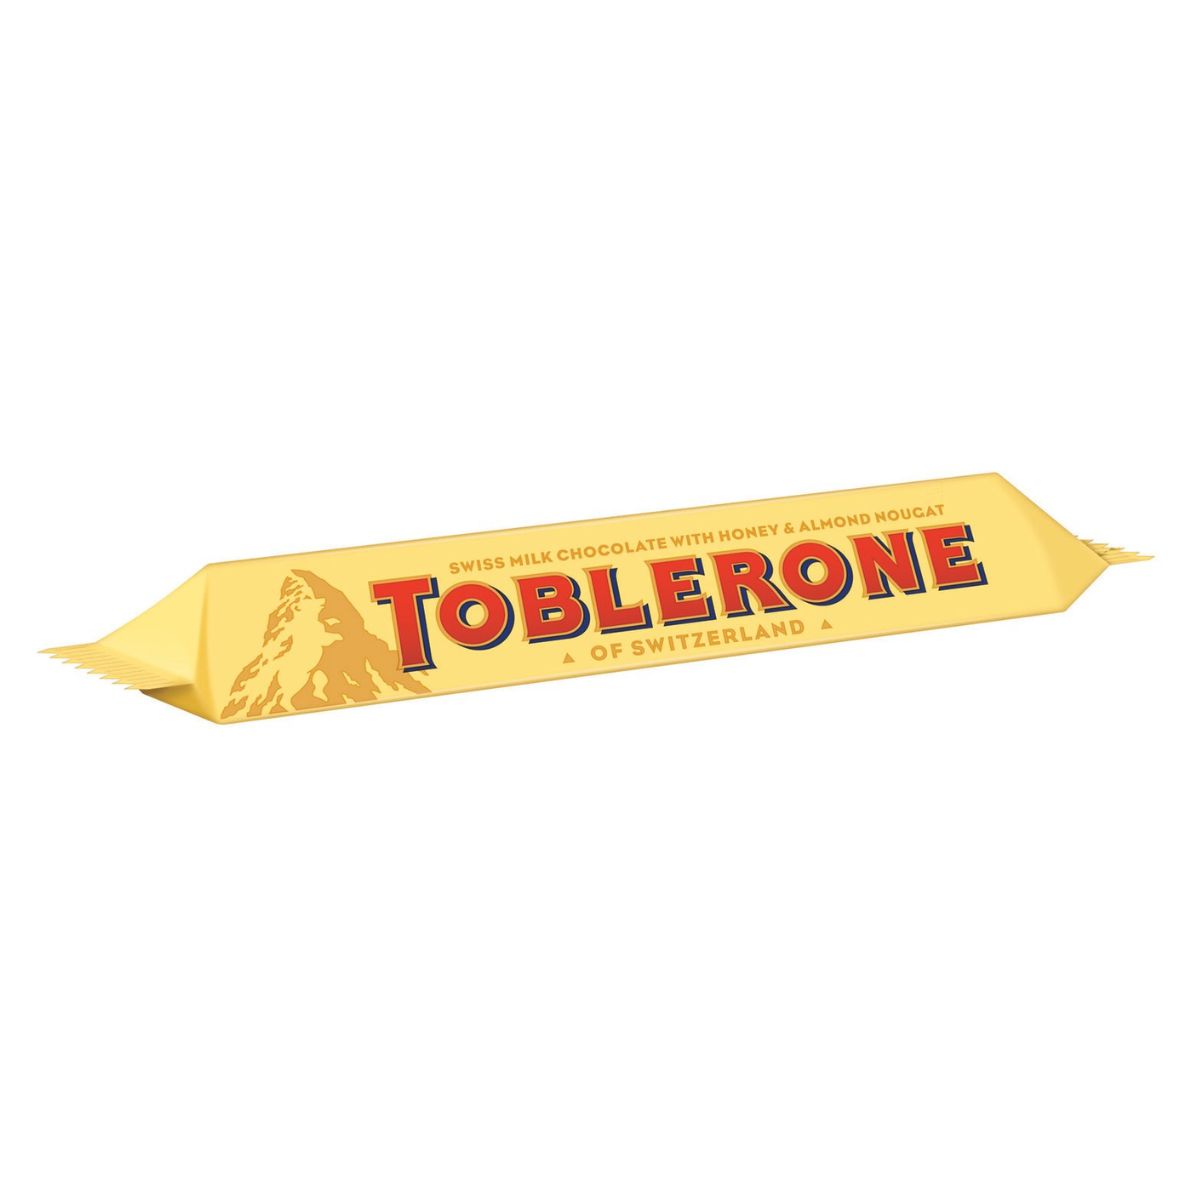 A bar of Toblerone Milk Chocolate - 35g on a white background.